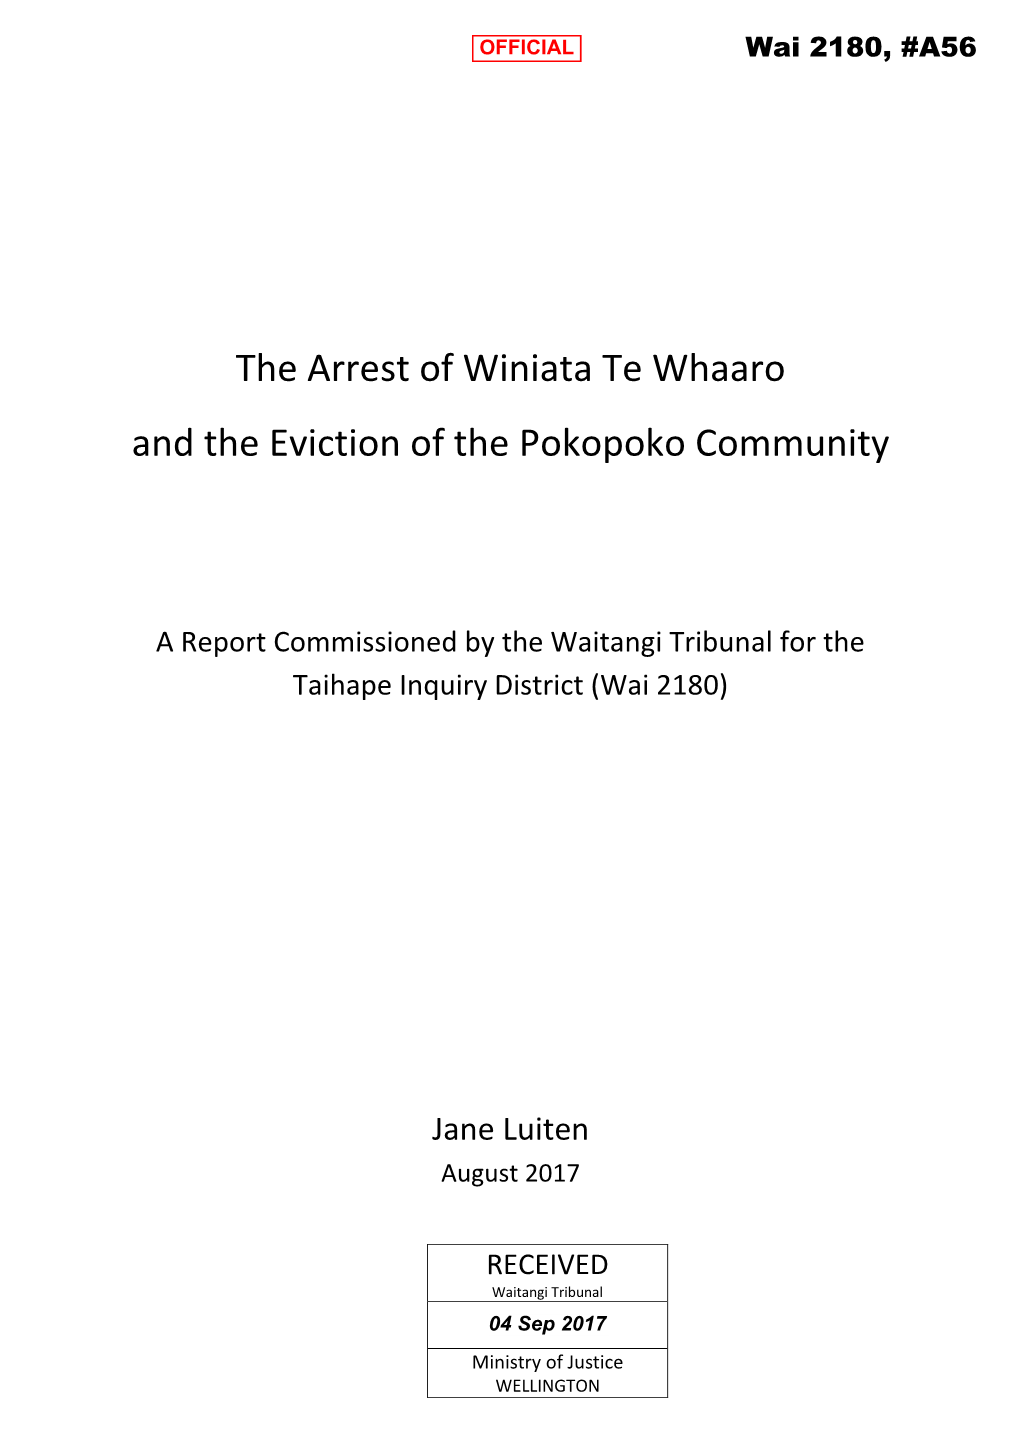 The Arrest of Winiata Te Whaaro and the Eviction of the Pokopoko Community